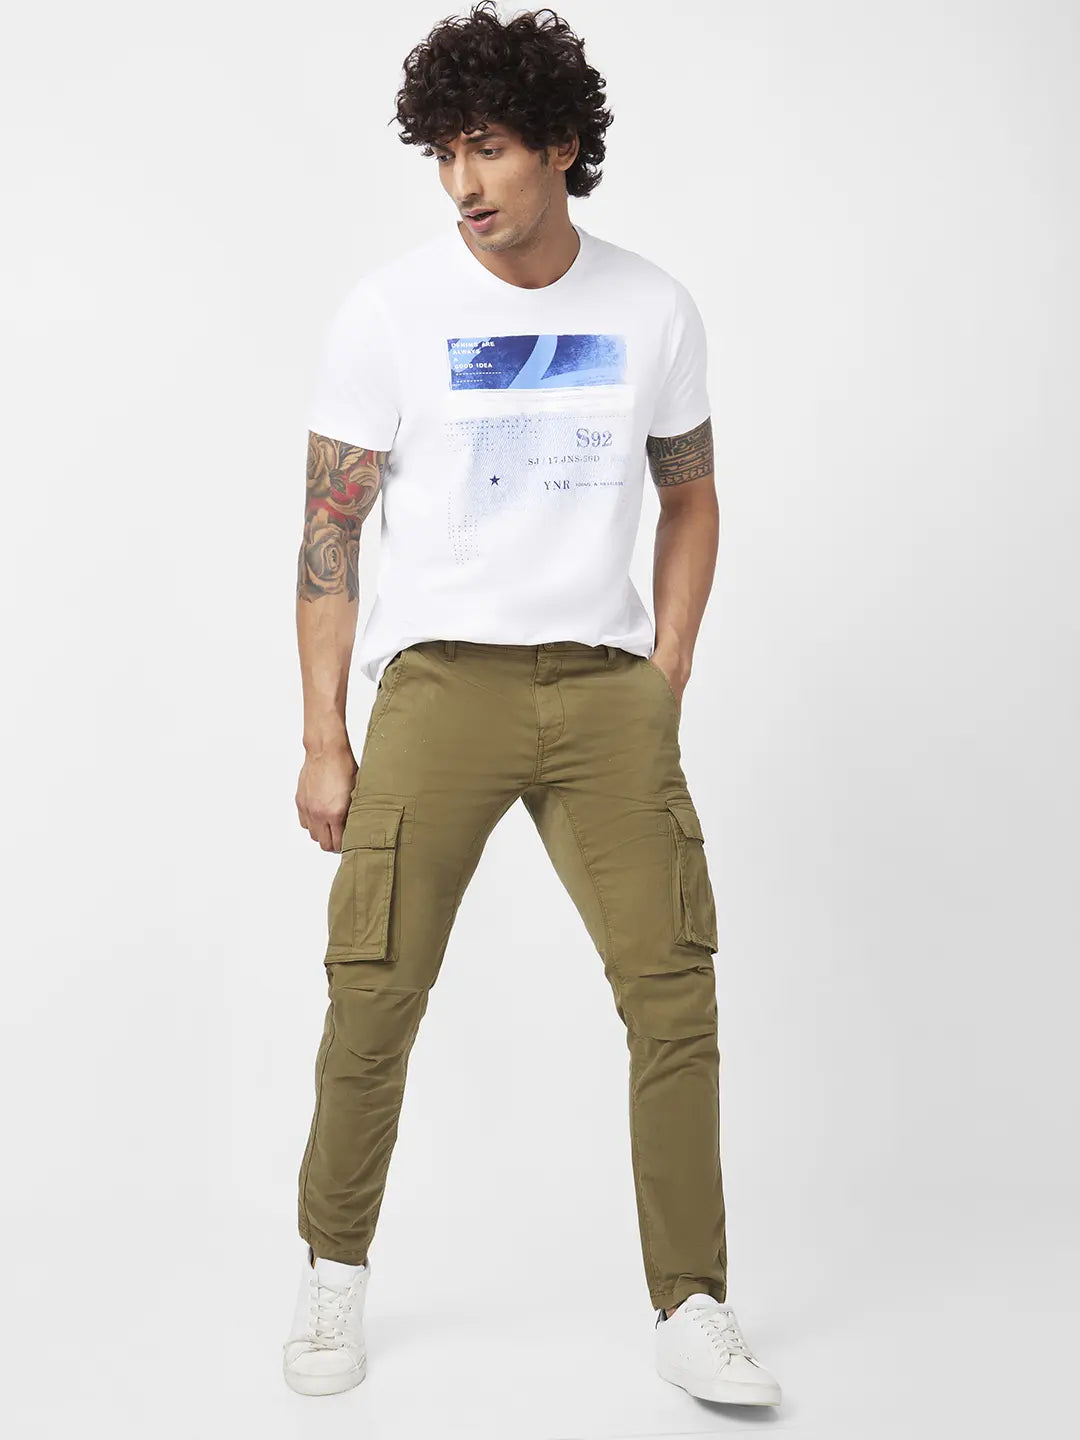 Buy OnlineSpykar Men Moss Green Cotton Tapered Fit Ankle Length